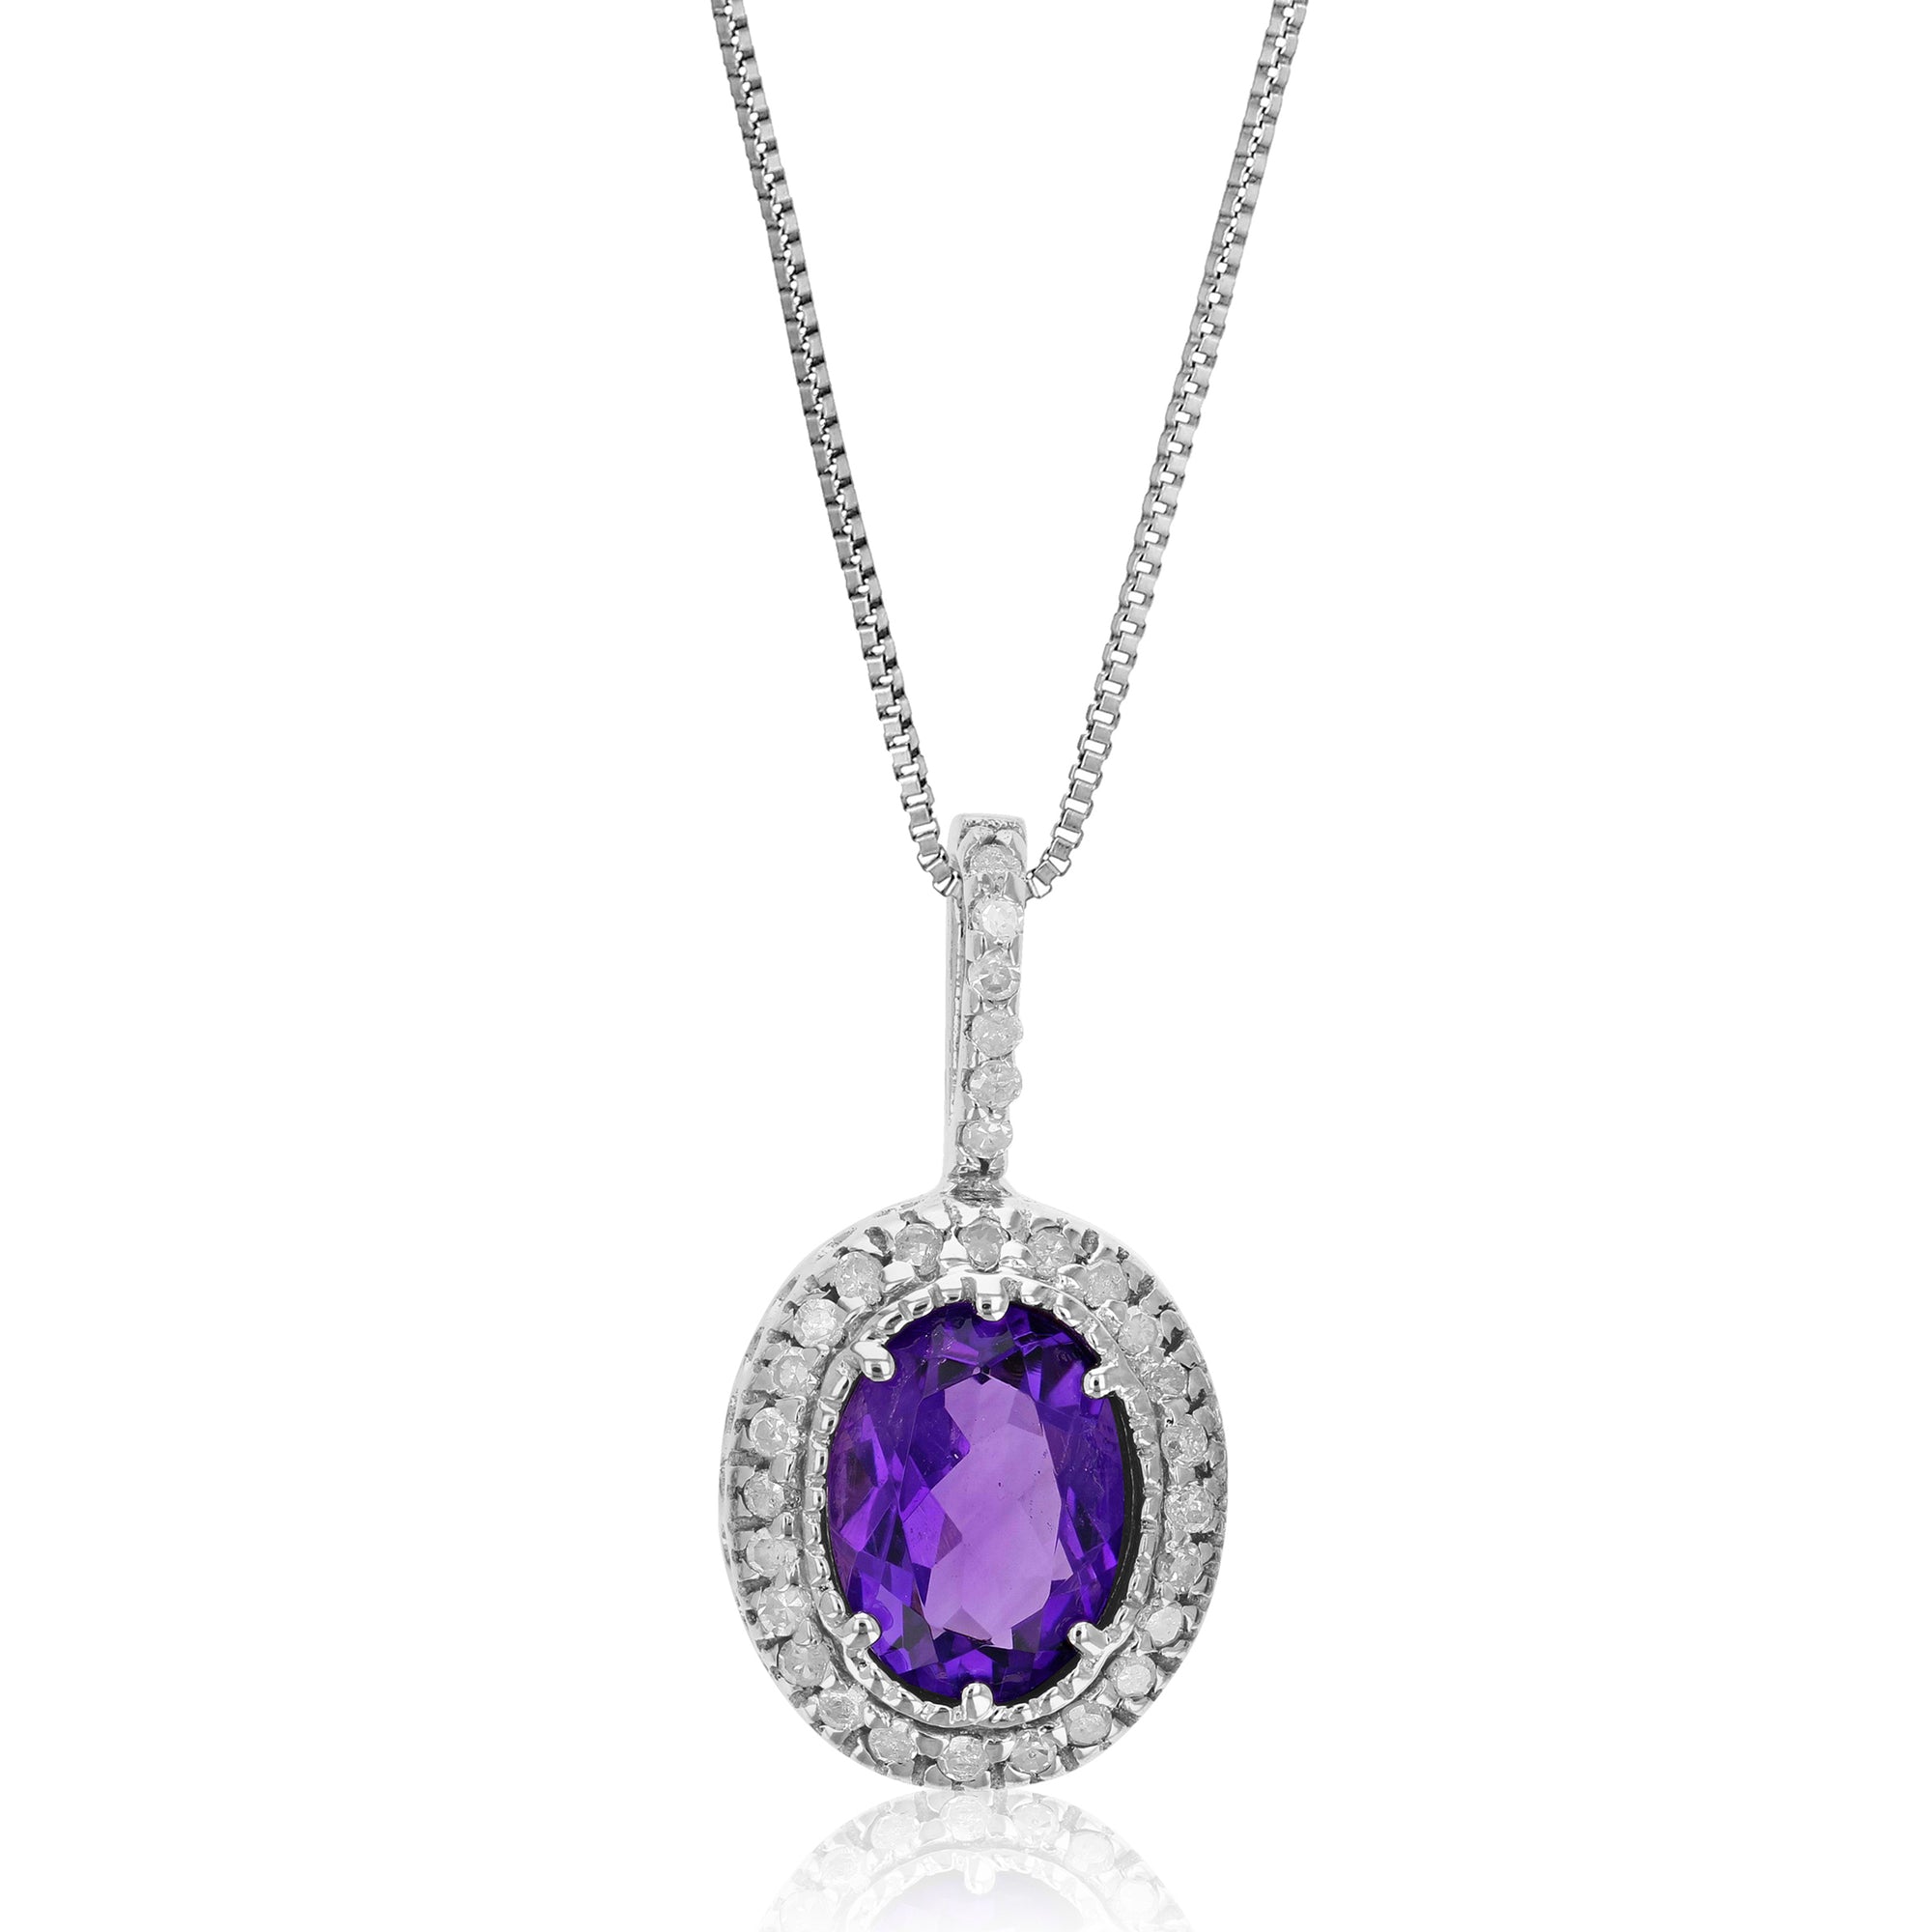 1.30 cttw Diamond Pendant, Amethyst and Diamond Pendant Necklace for Women in 14K White Gold with 18 Inch Chain, Prong Setting